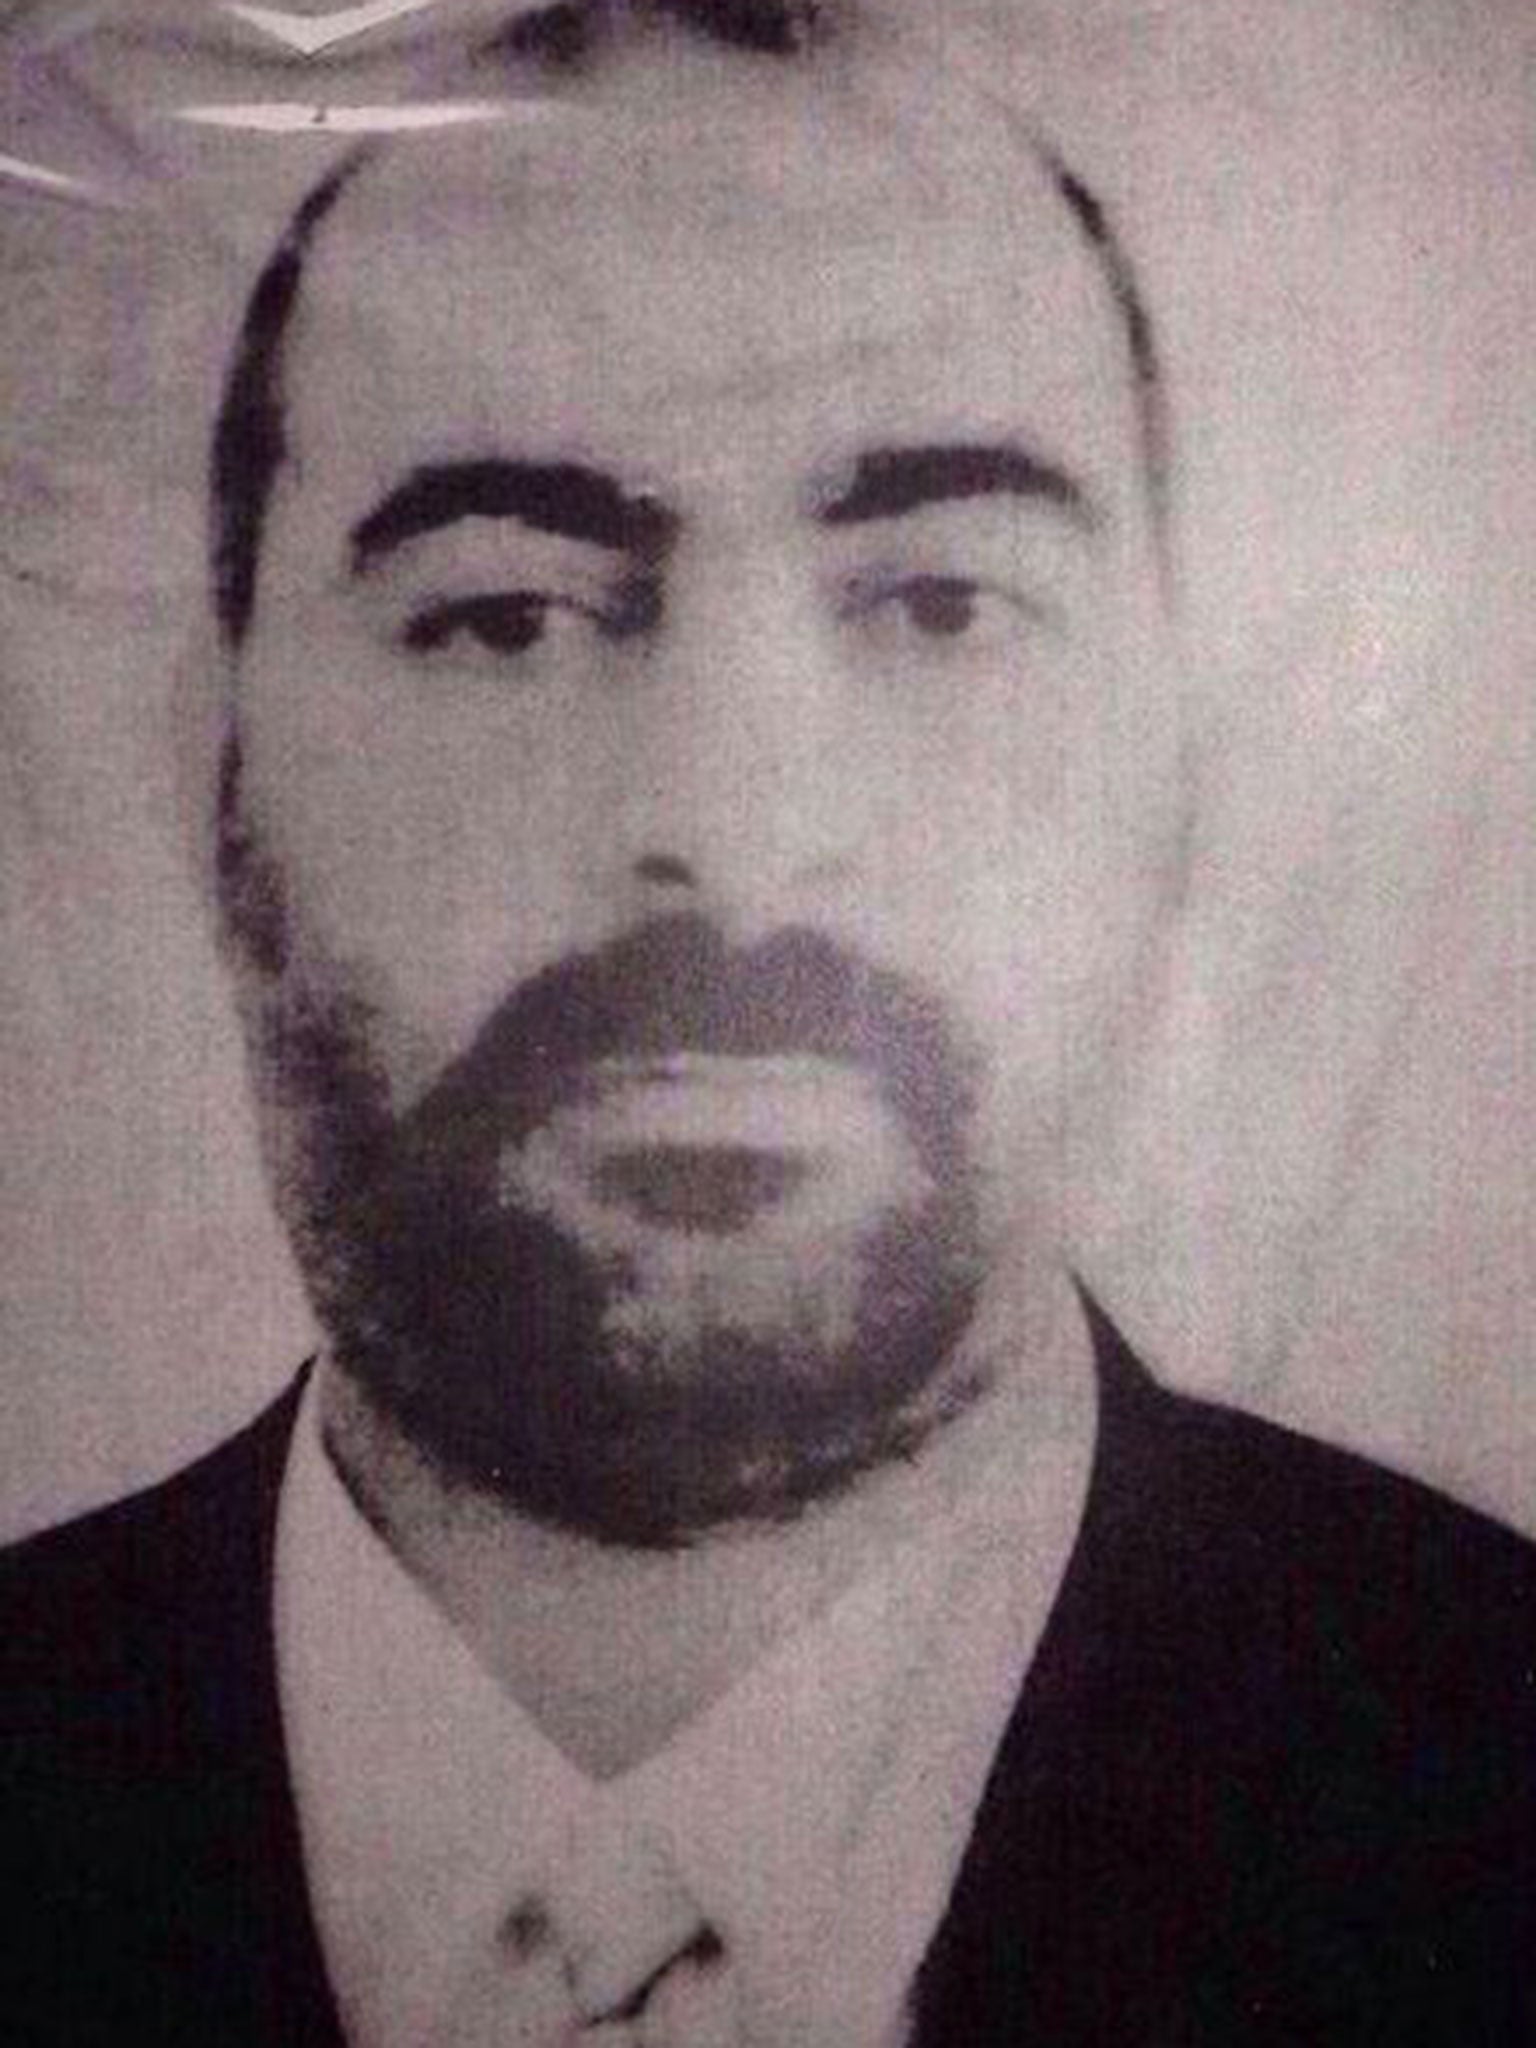 An undated picture released by Iraq’s Interior Ministry claiming to show Isis leader Abu Bakr al-Baghdadi